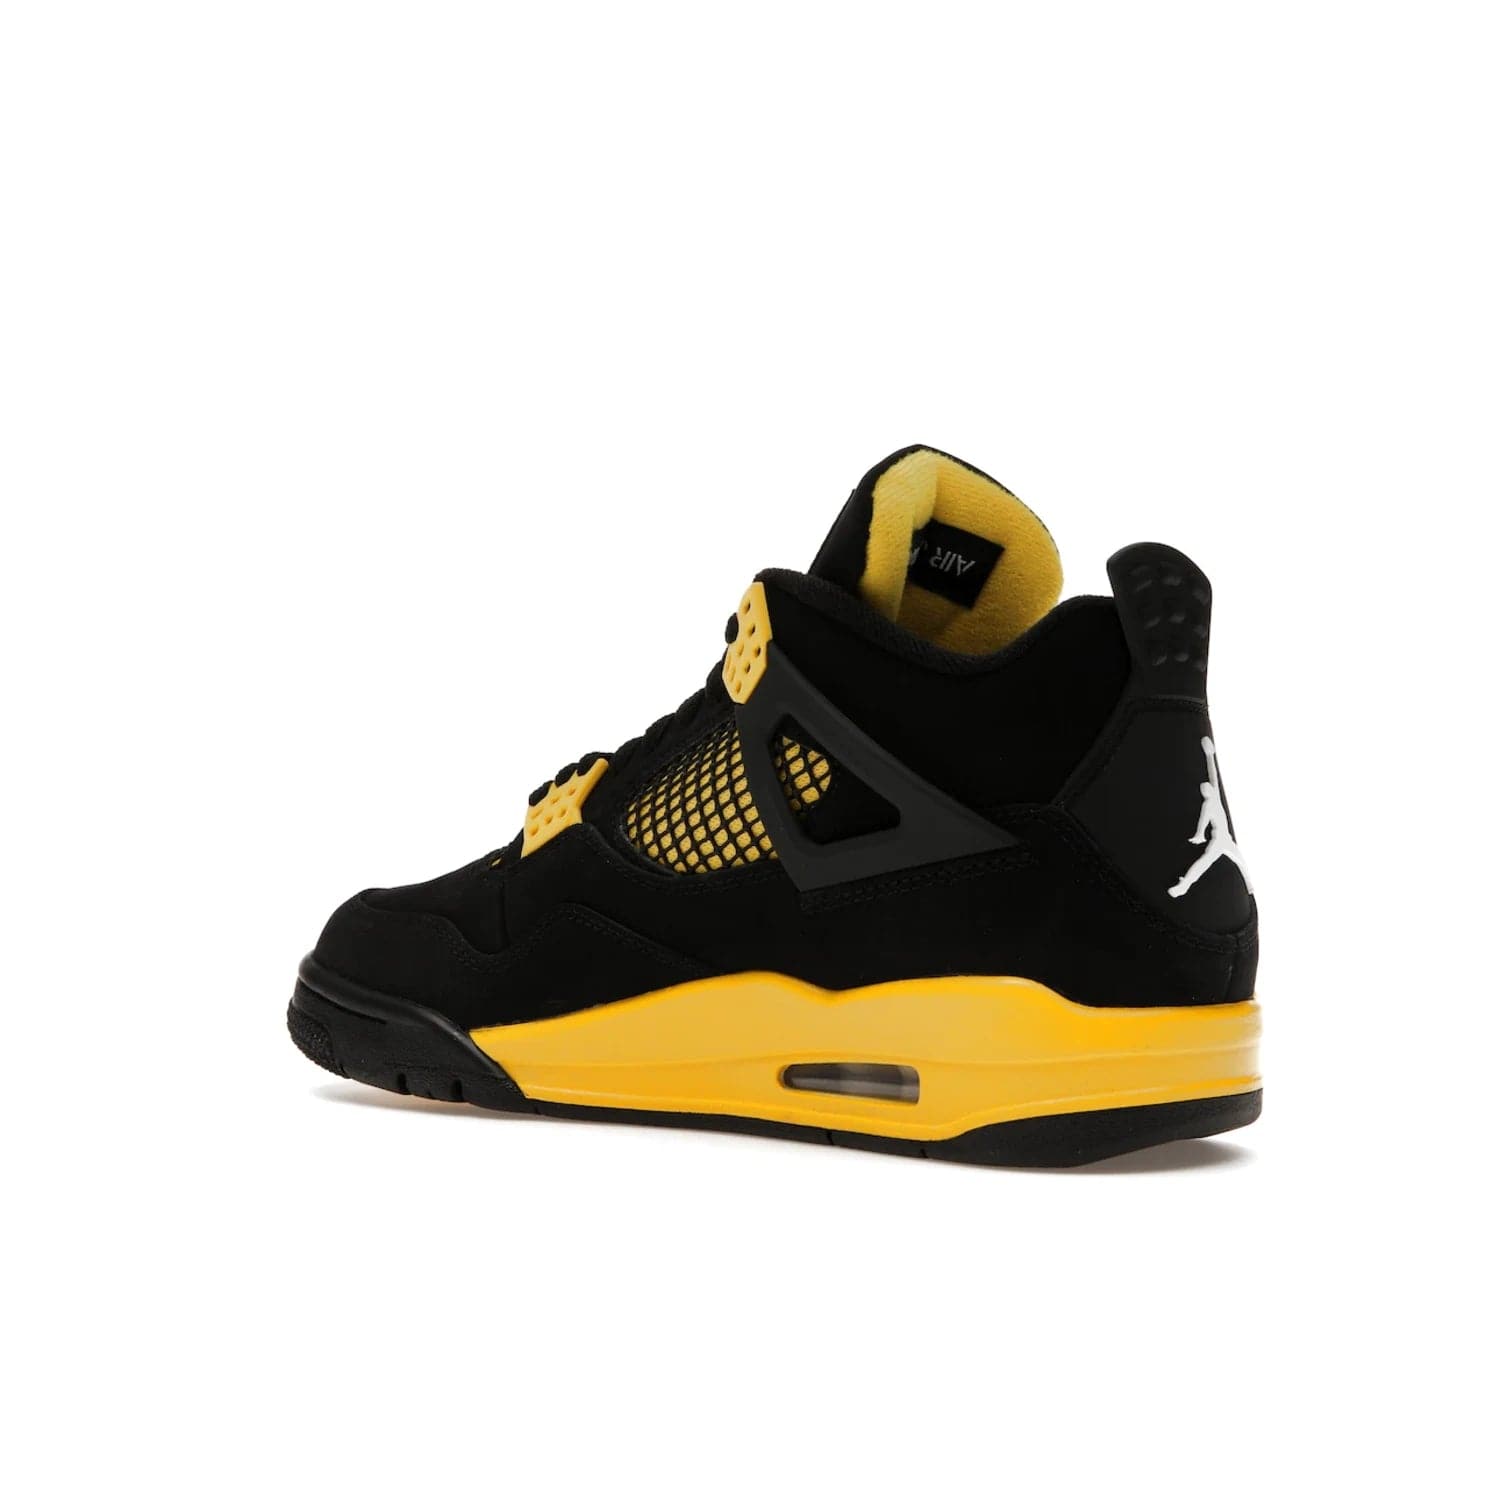 Jordan 4 Retro Thunder (2023) - Image 23 - Only at www.BallersClubKickz.com - Iconic Air Jordan 4 Retro Thunder (2023) returns with black nubuck upper and Tour Yellow details. Featuring Jumpman logo on heel tab, tongue and insoles. Dropping May 13th, 2023.